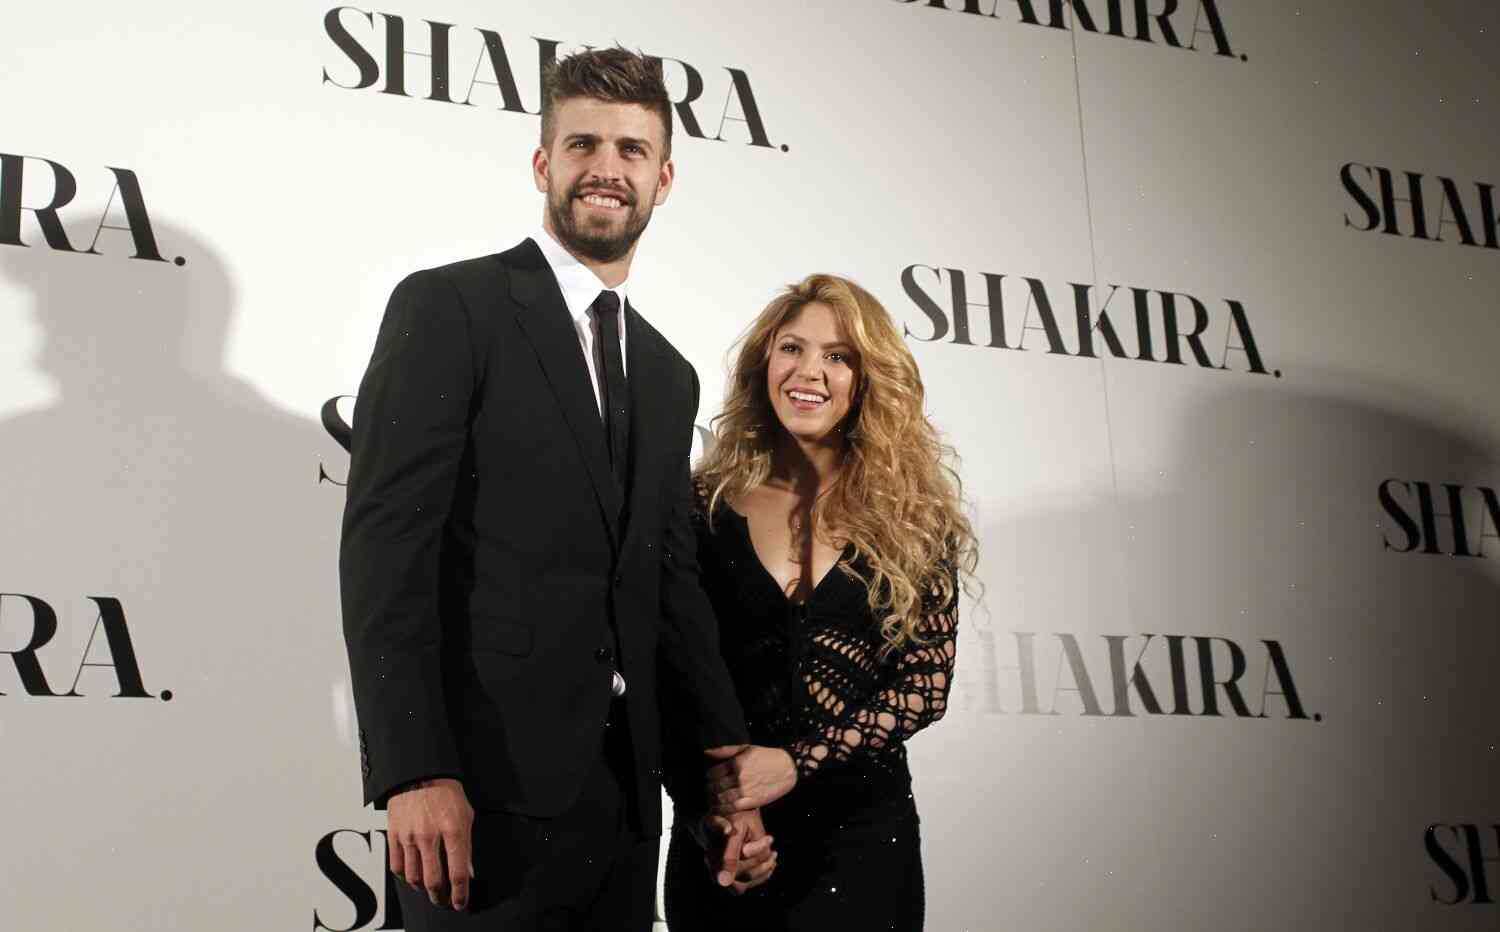 Shakira is currently seeking US residency after living in Canada, Britain and South America